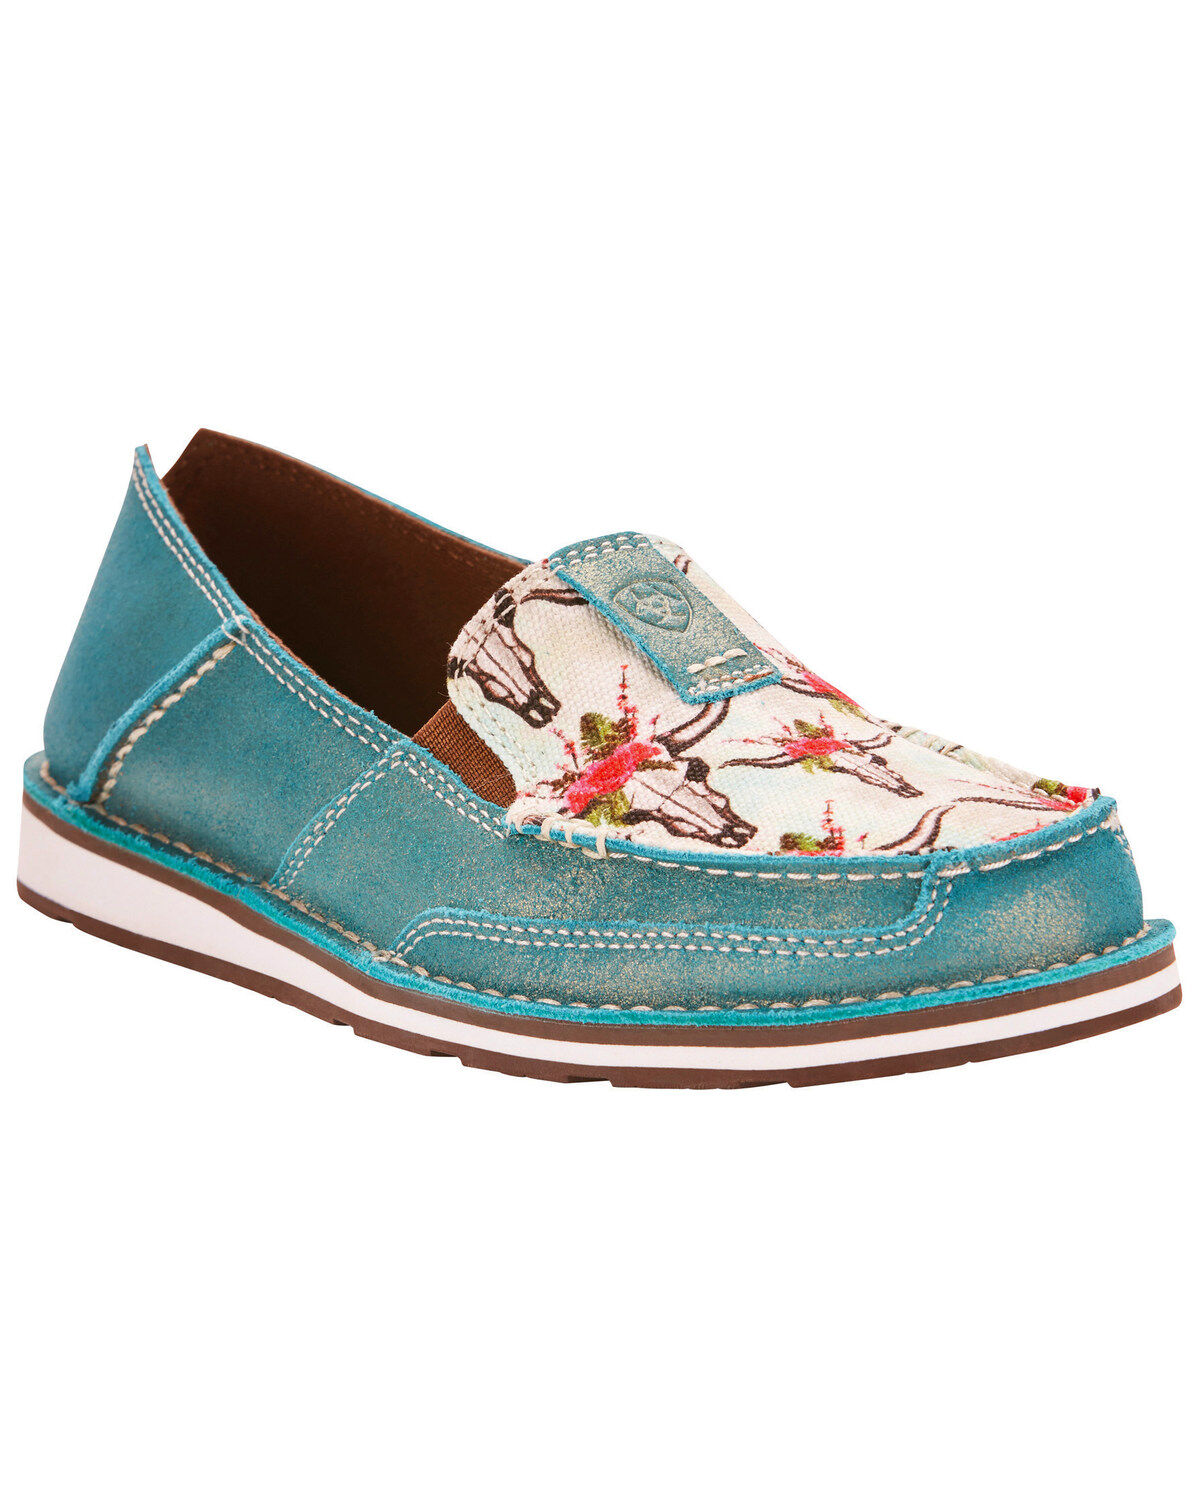 ariat tennis shoes turquoise